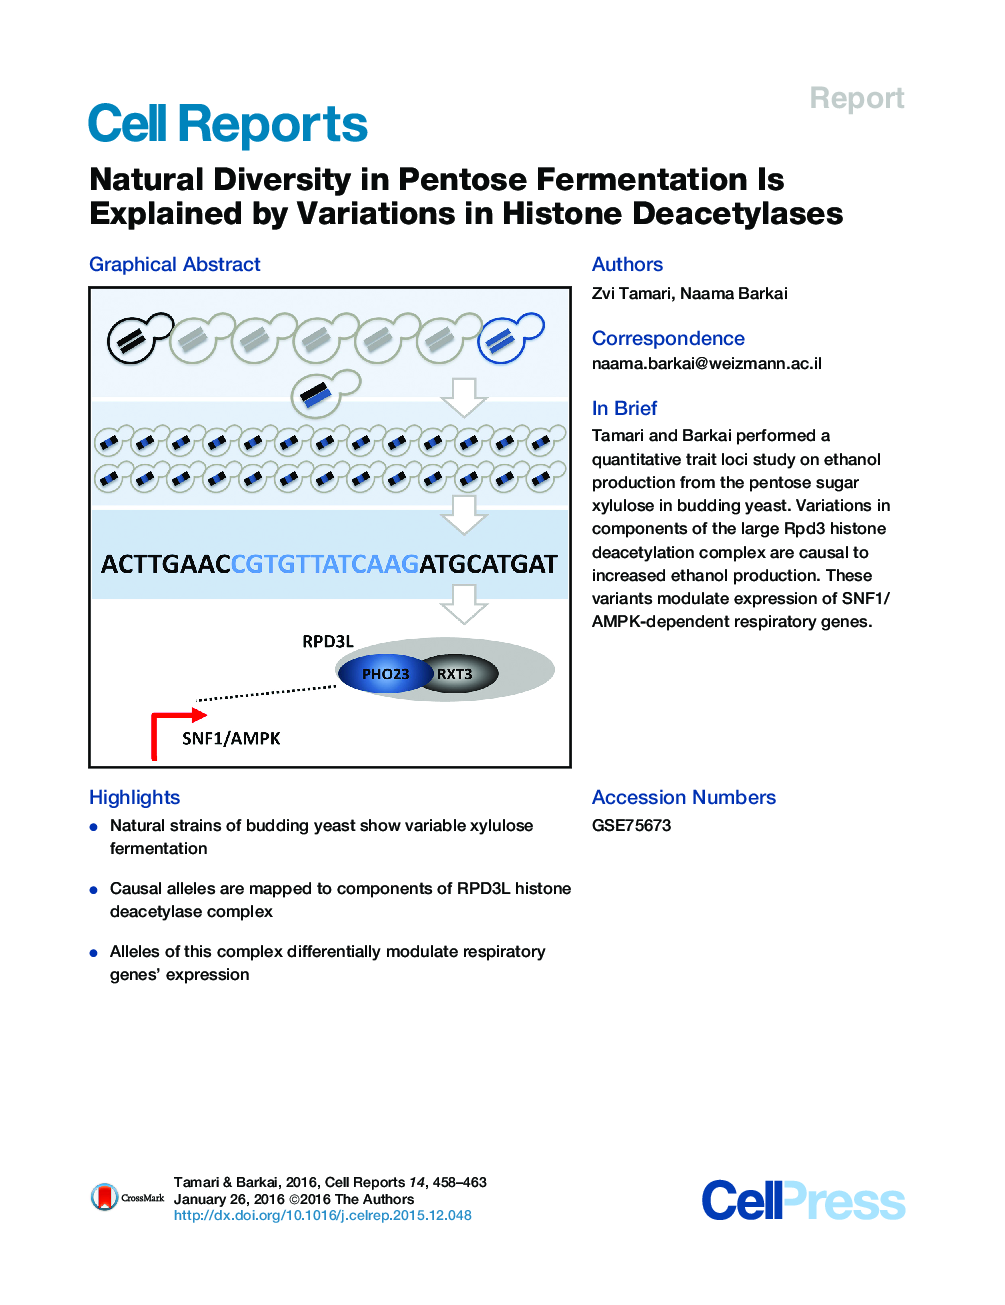 Natural Diversity in Pentose Fermentation Is Explained by Variations in Histone Deacetylases 